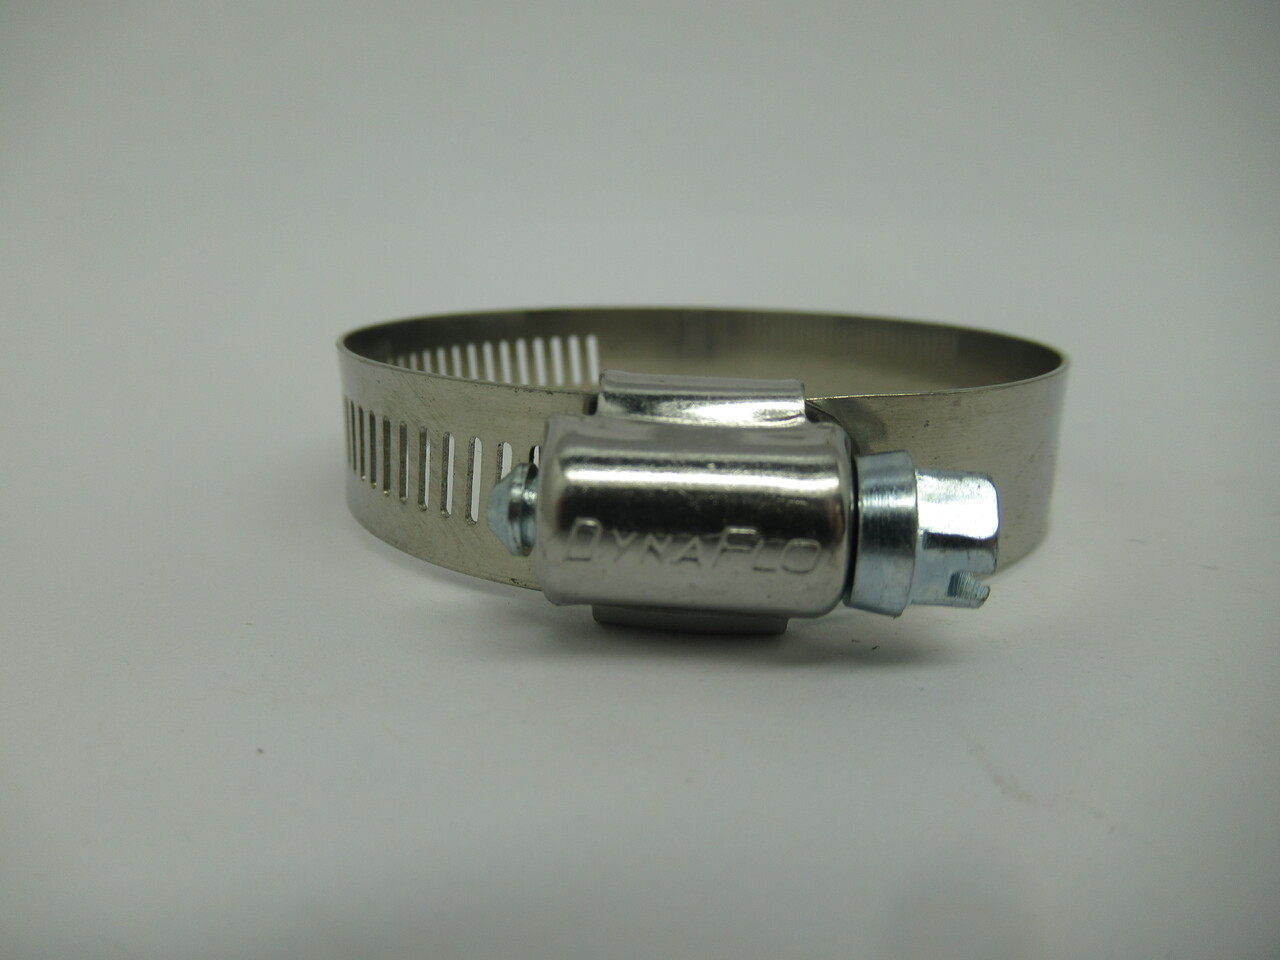 DynaFlo 32 2-1/2" Stainless Steel Worm Drive Clamp 38-64mm NOP